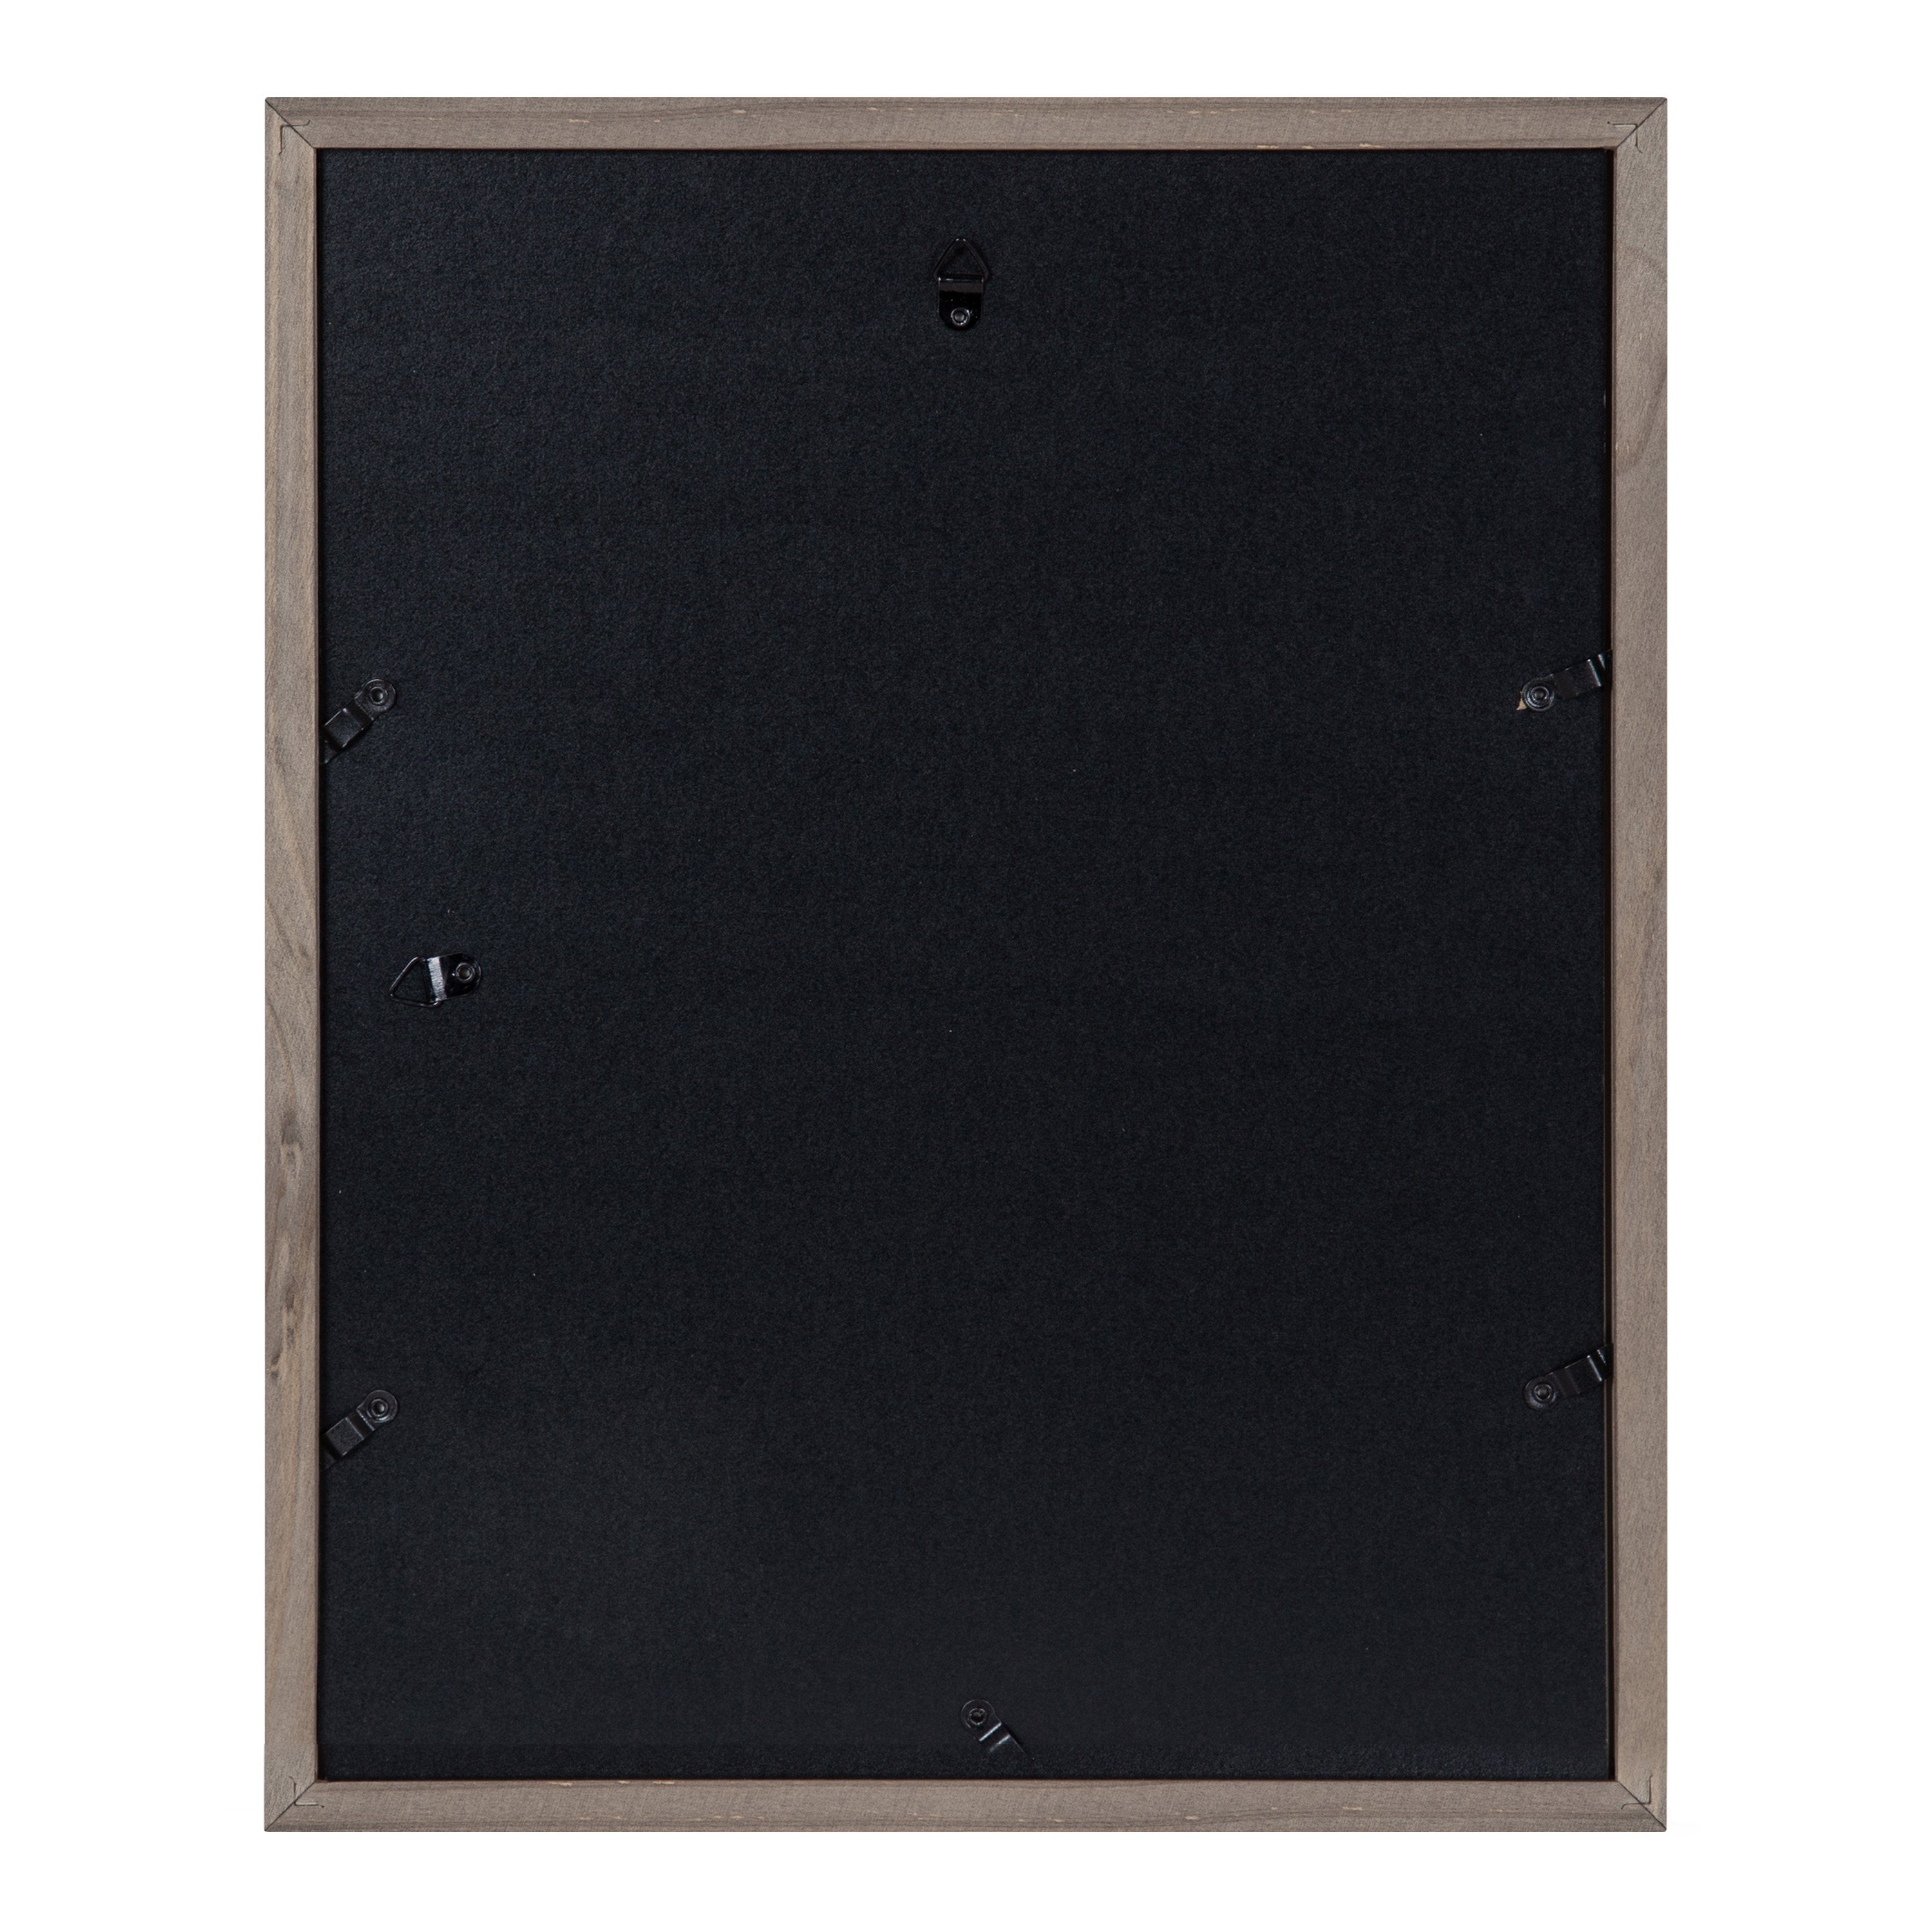 Gallery Solutions 11x14 Wood Wall Frame with Double Black Mat for 8x10 Image